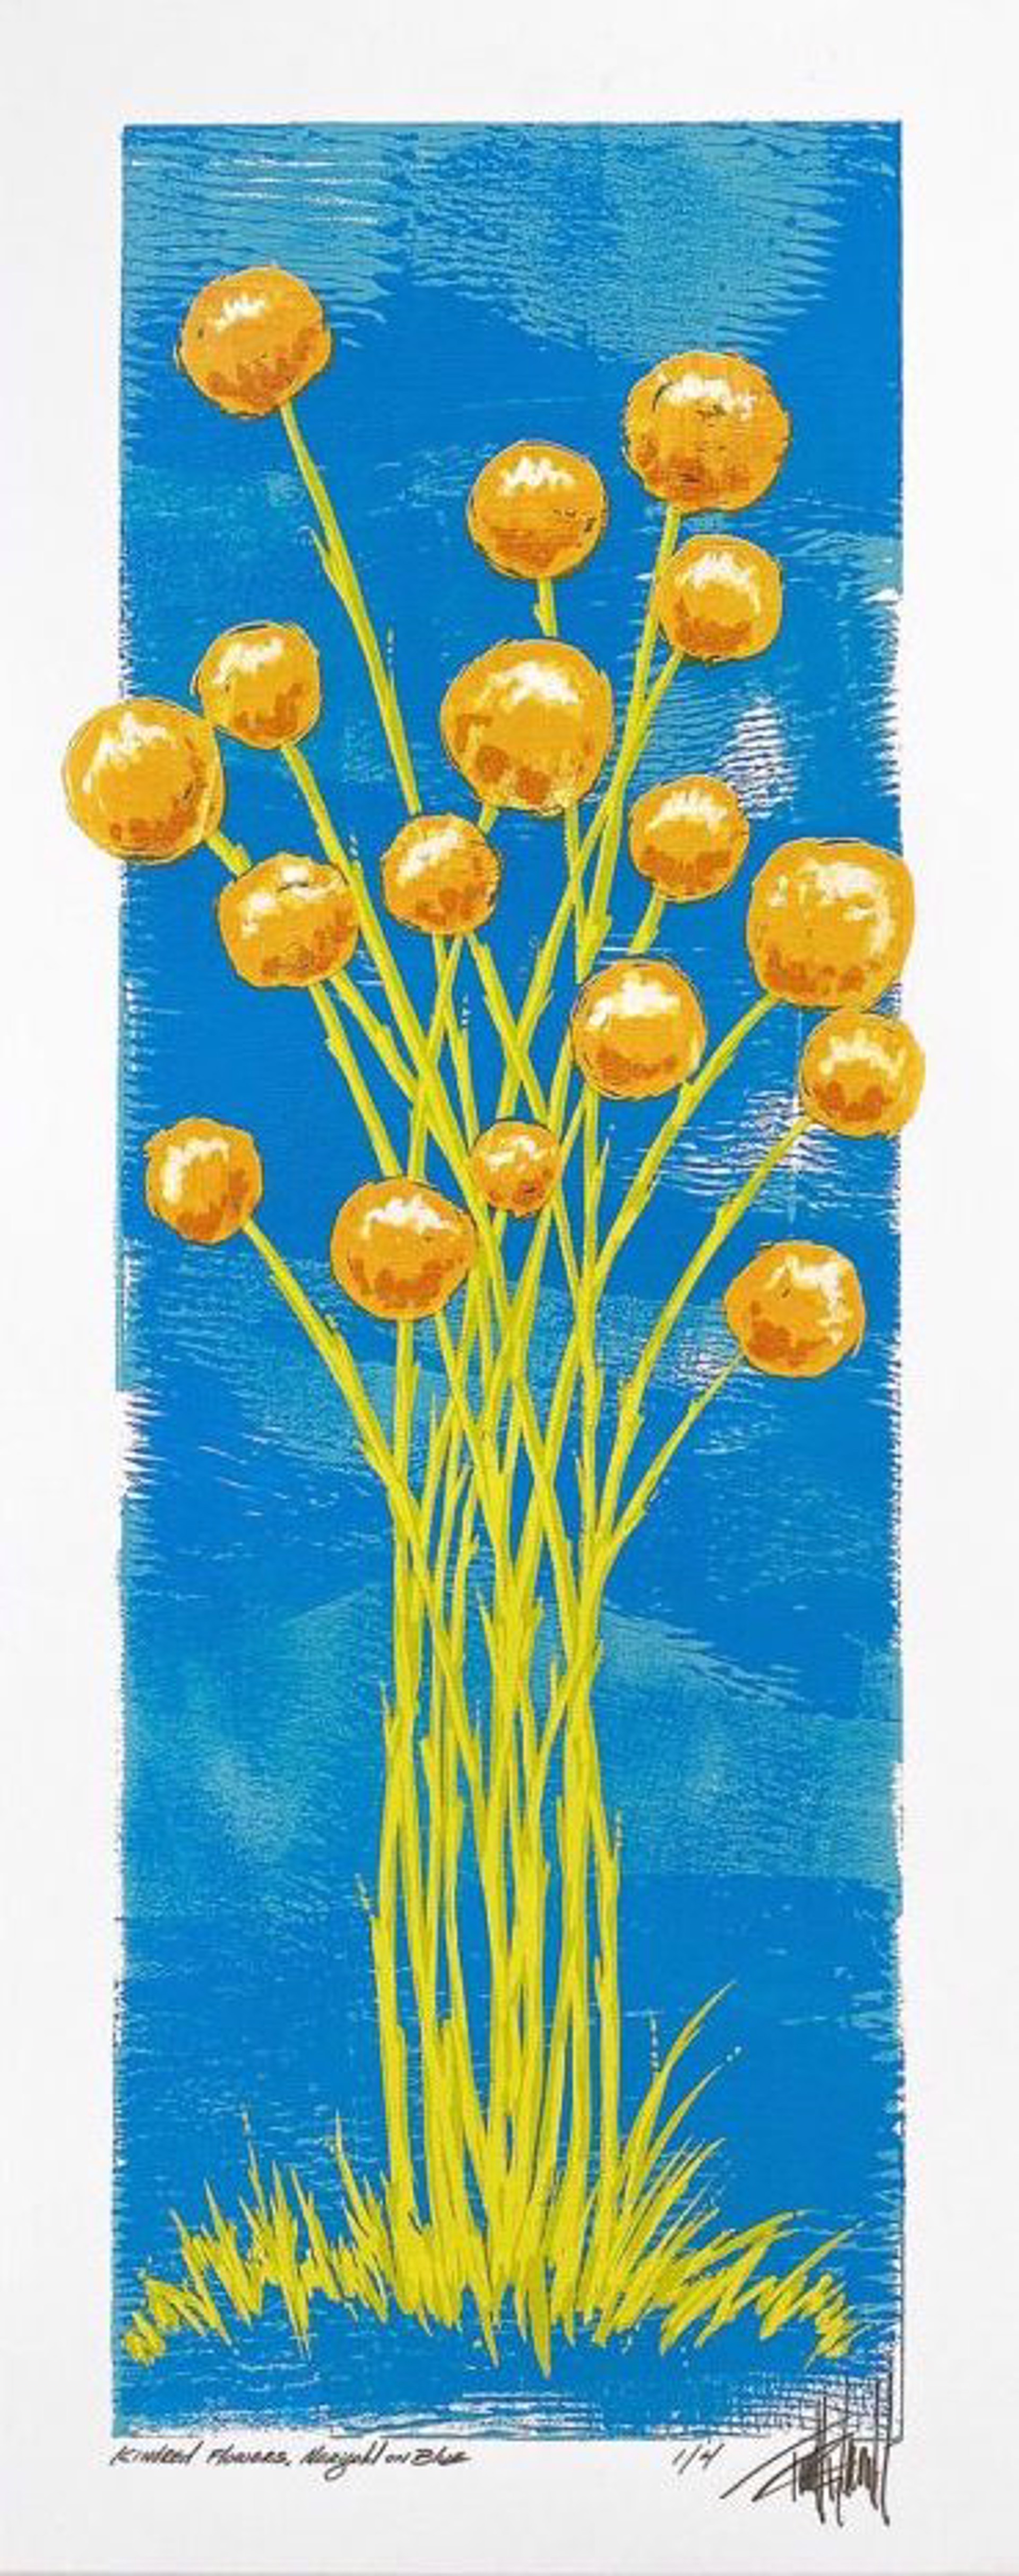 Kindred Flowers, Marigold on Blue by Terrell Thornhill